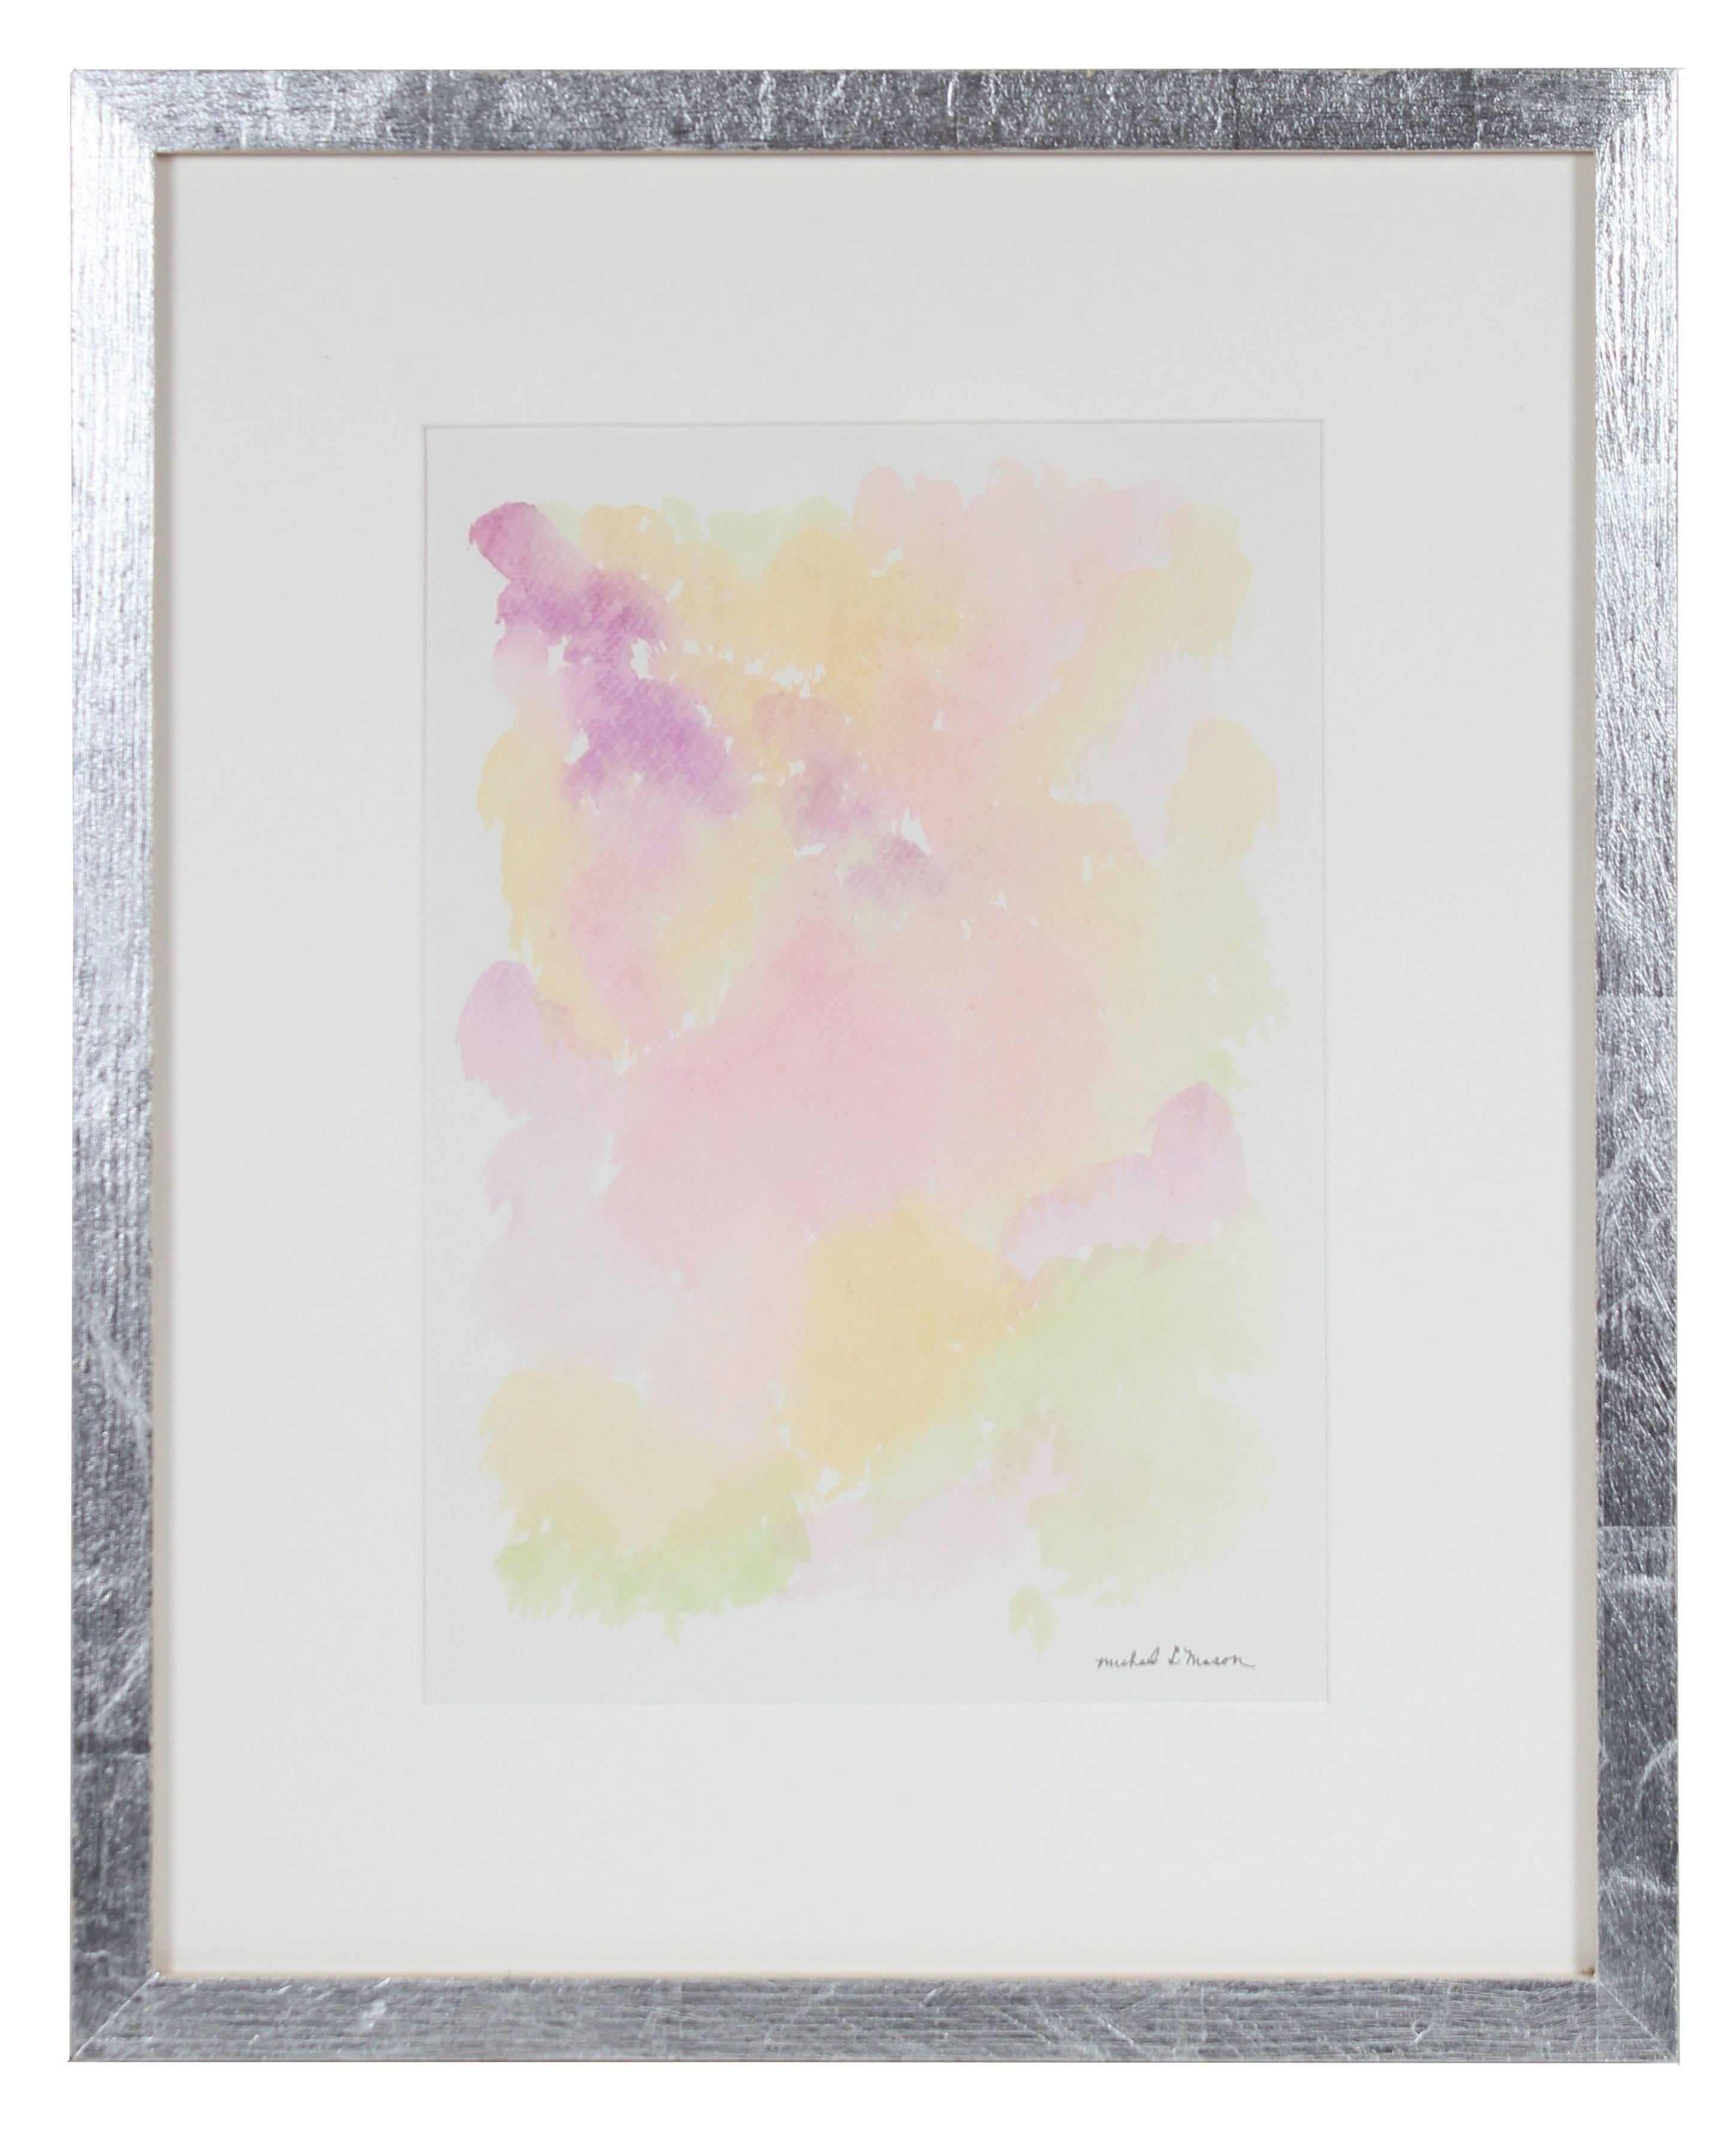 Michael L. Mason Abstract Drawing - Pale Abstract Watercolor Painting in Pink, Purple, Orange, Yellow, Green, 1963